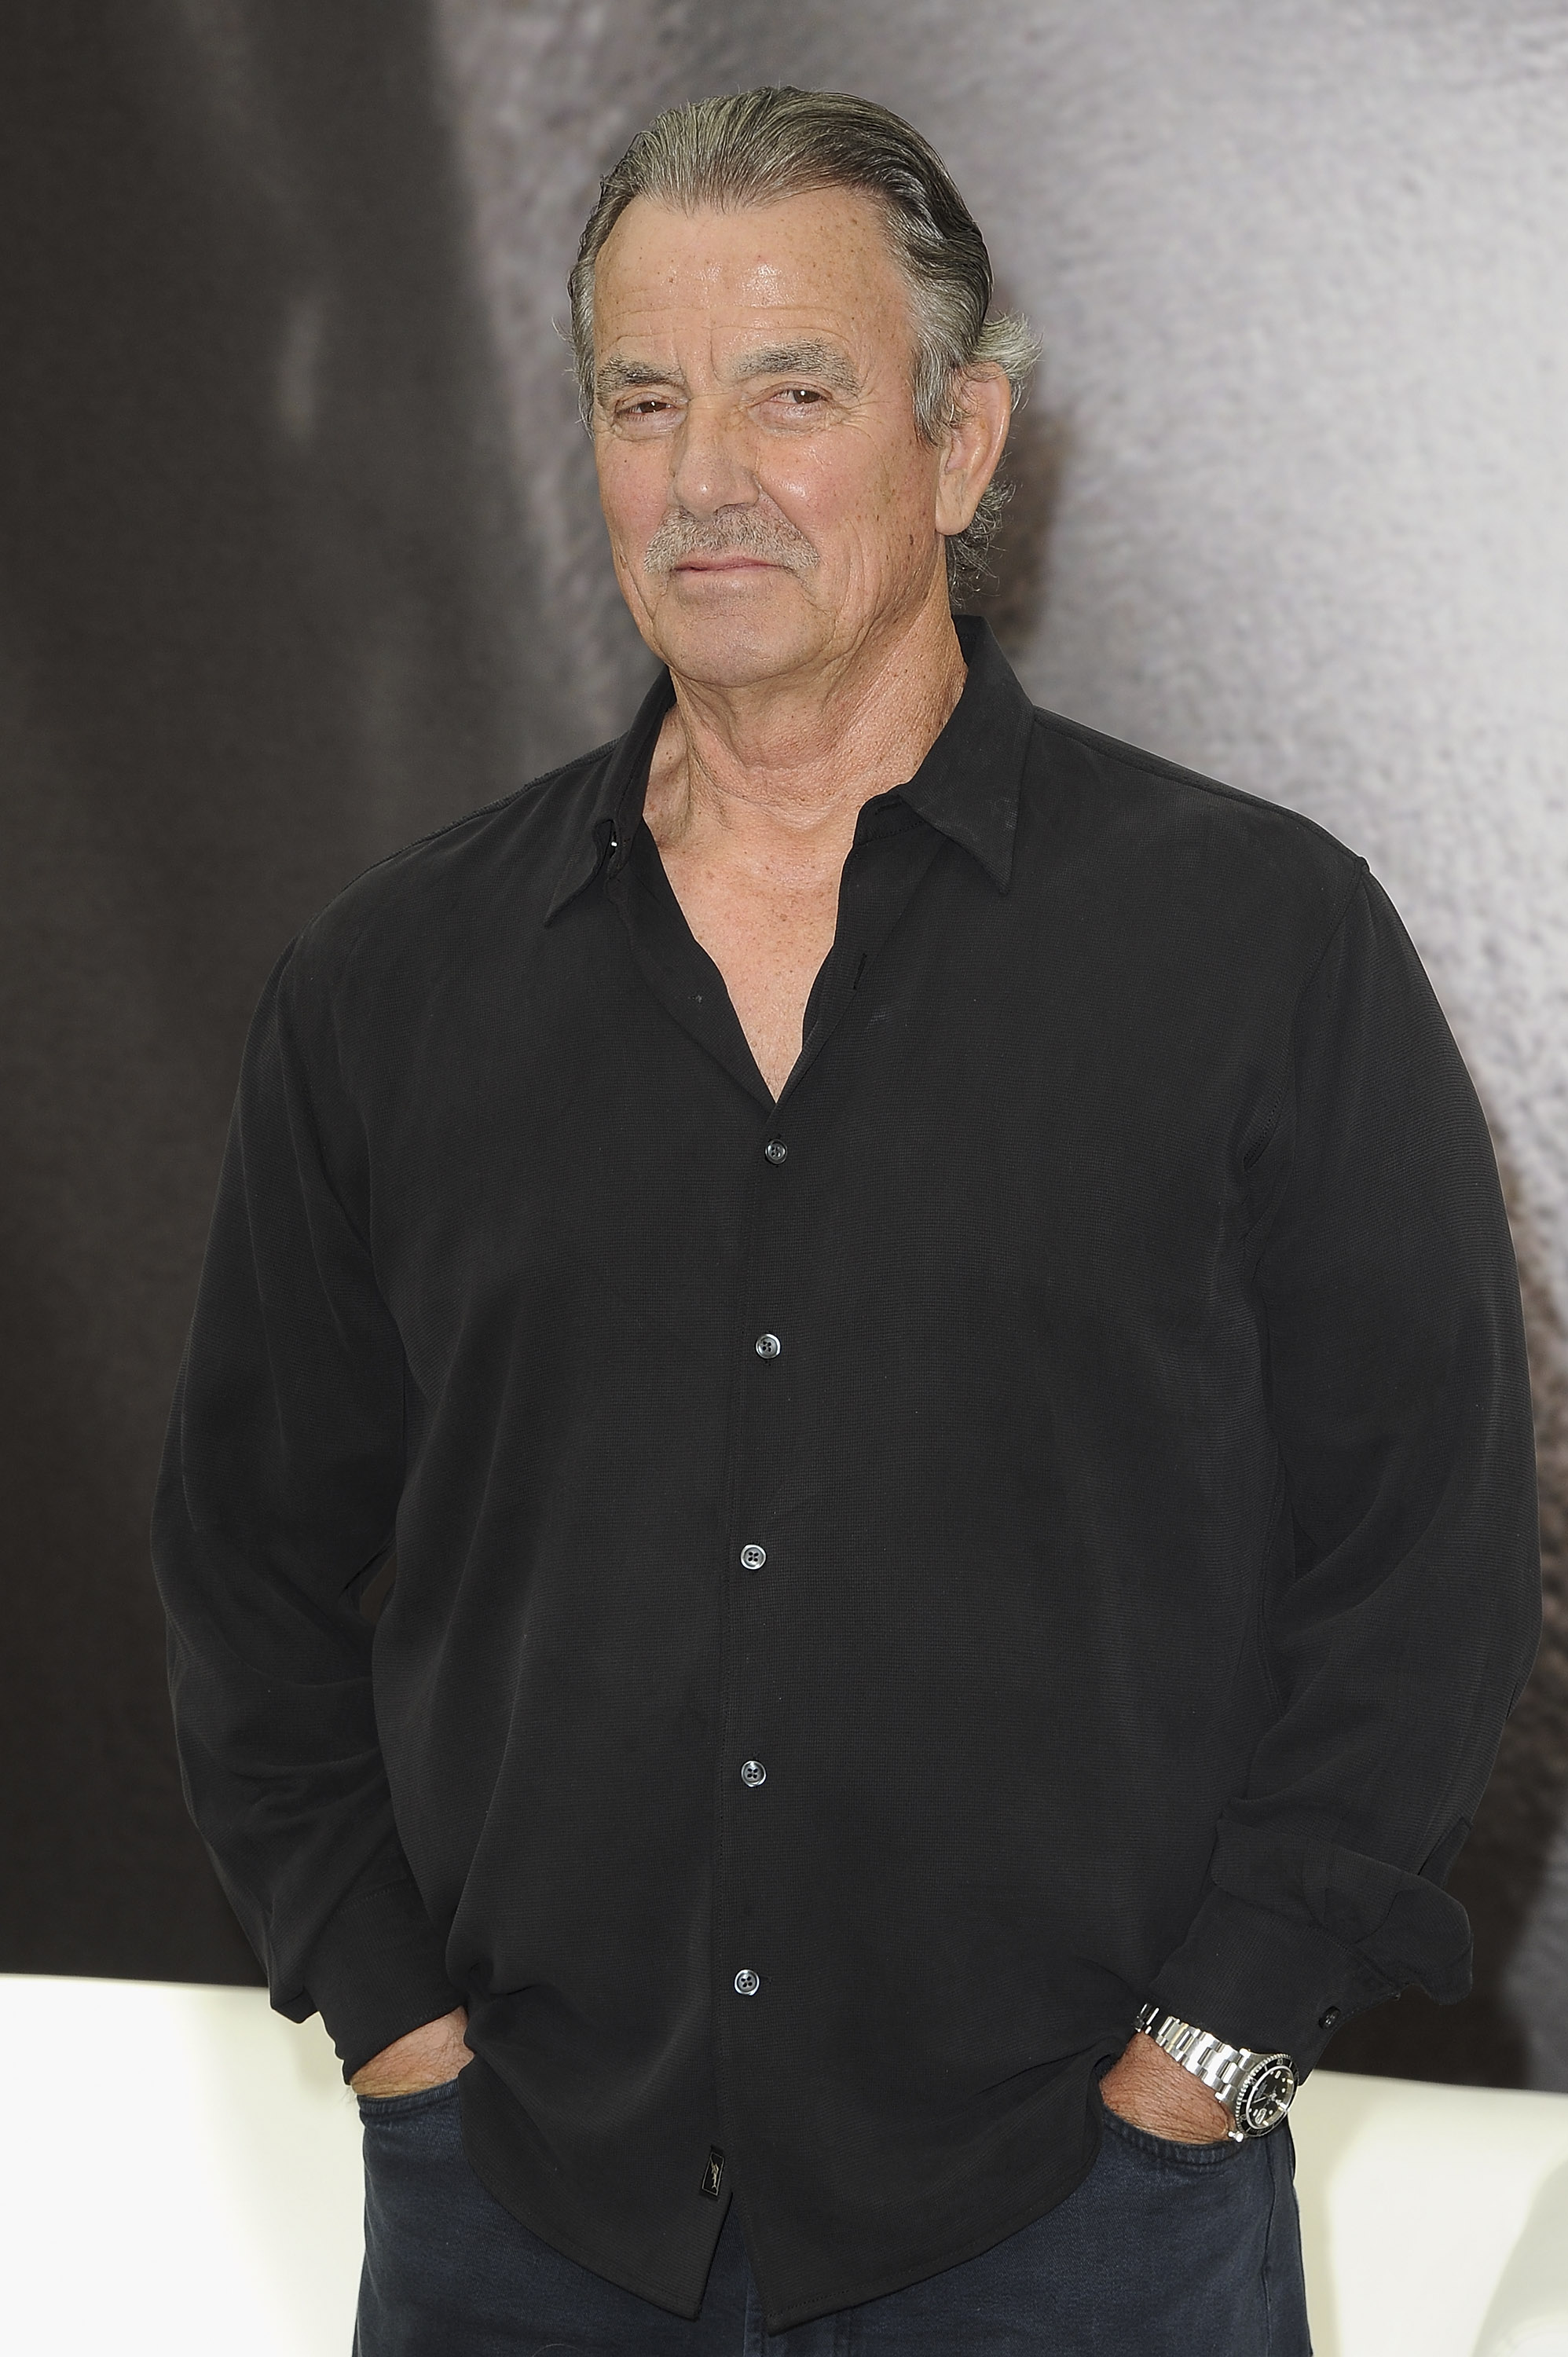 Eric Braeden attends "The Young And The Restless" photocall as part of the 53rd Monte Carlo TV Festival on June 10, 2013, in Monte-Carlo, Monaco. | Source: Getty Images